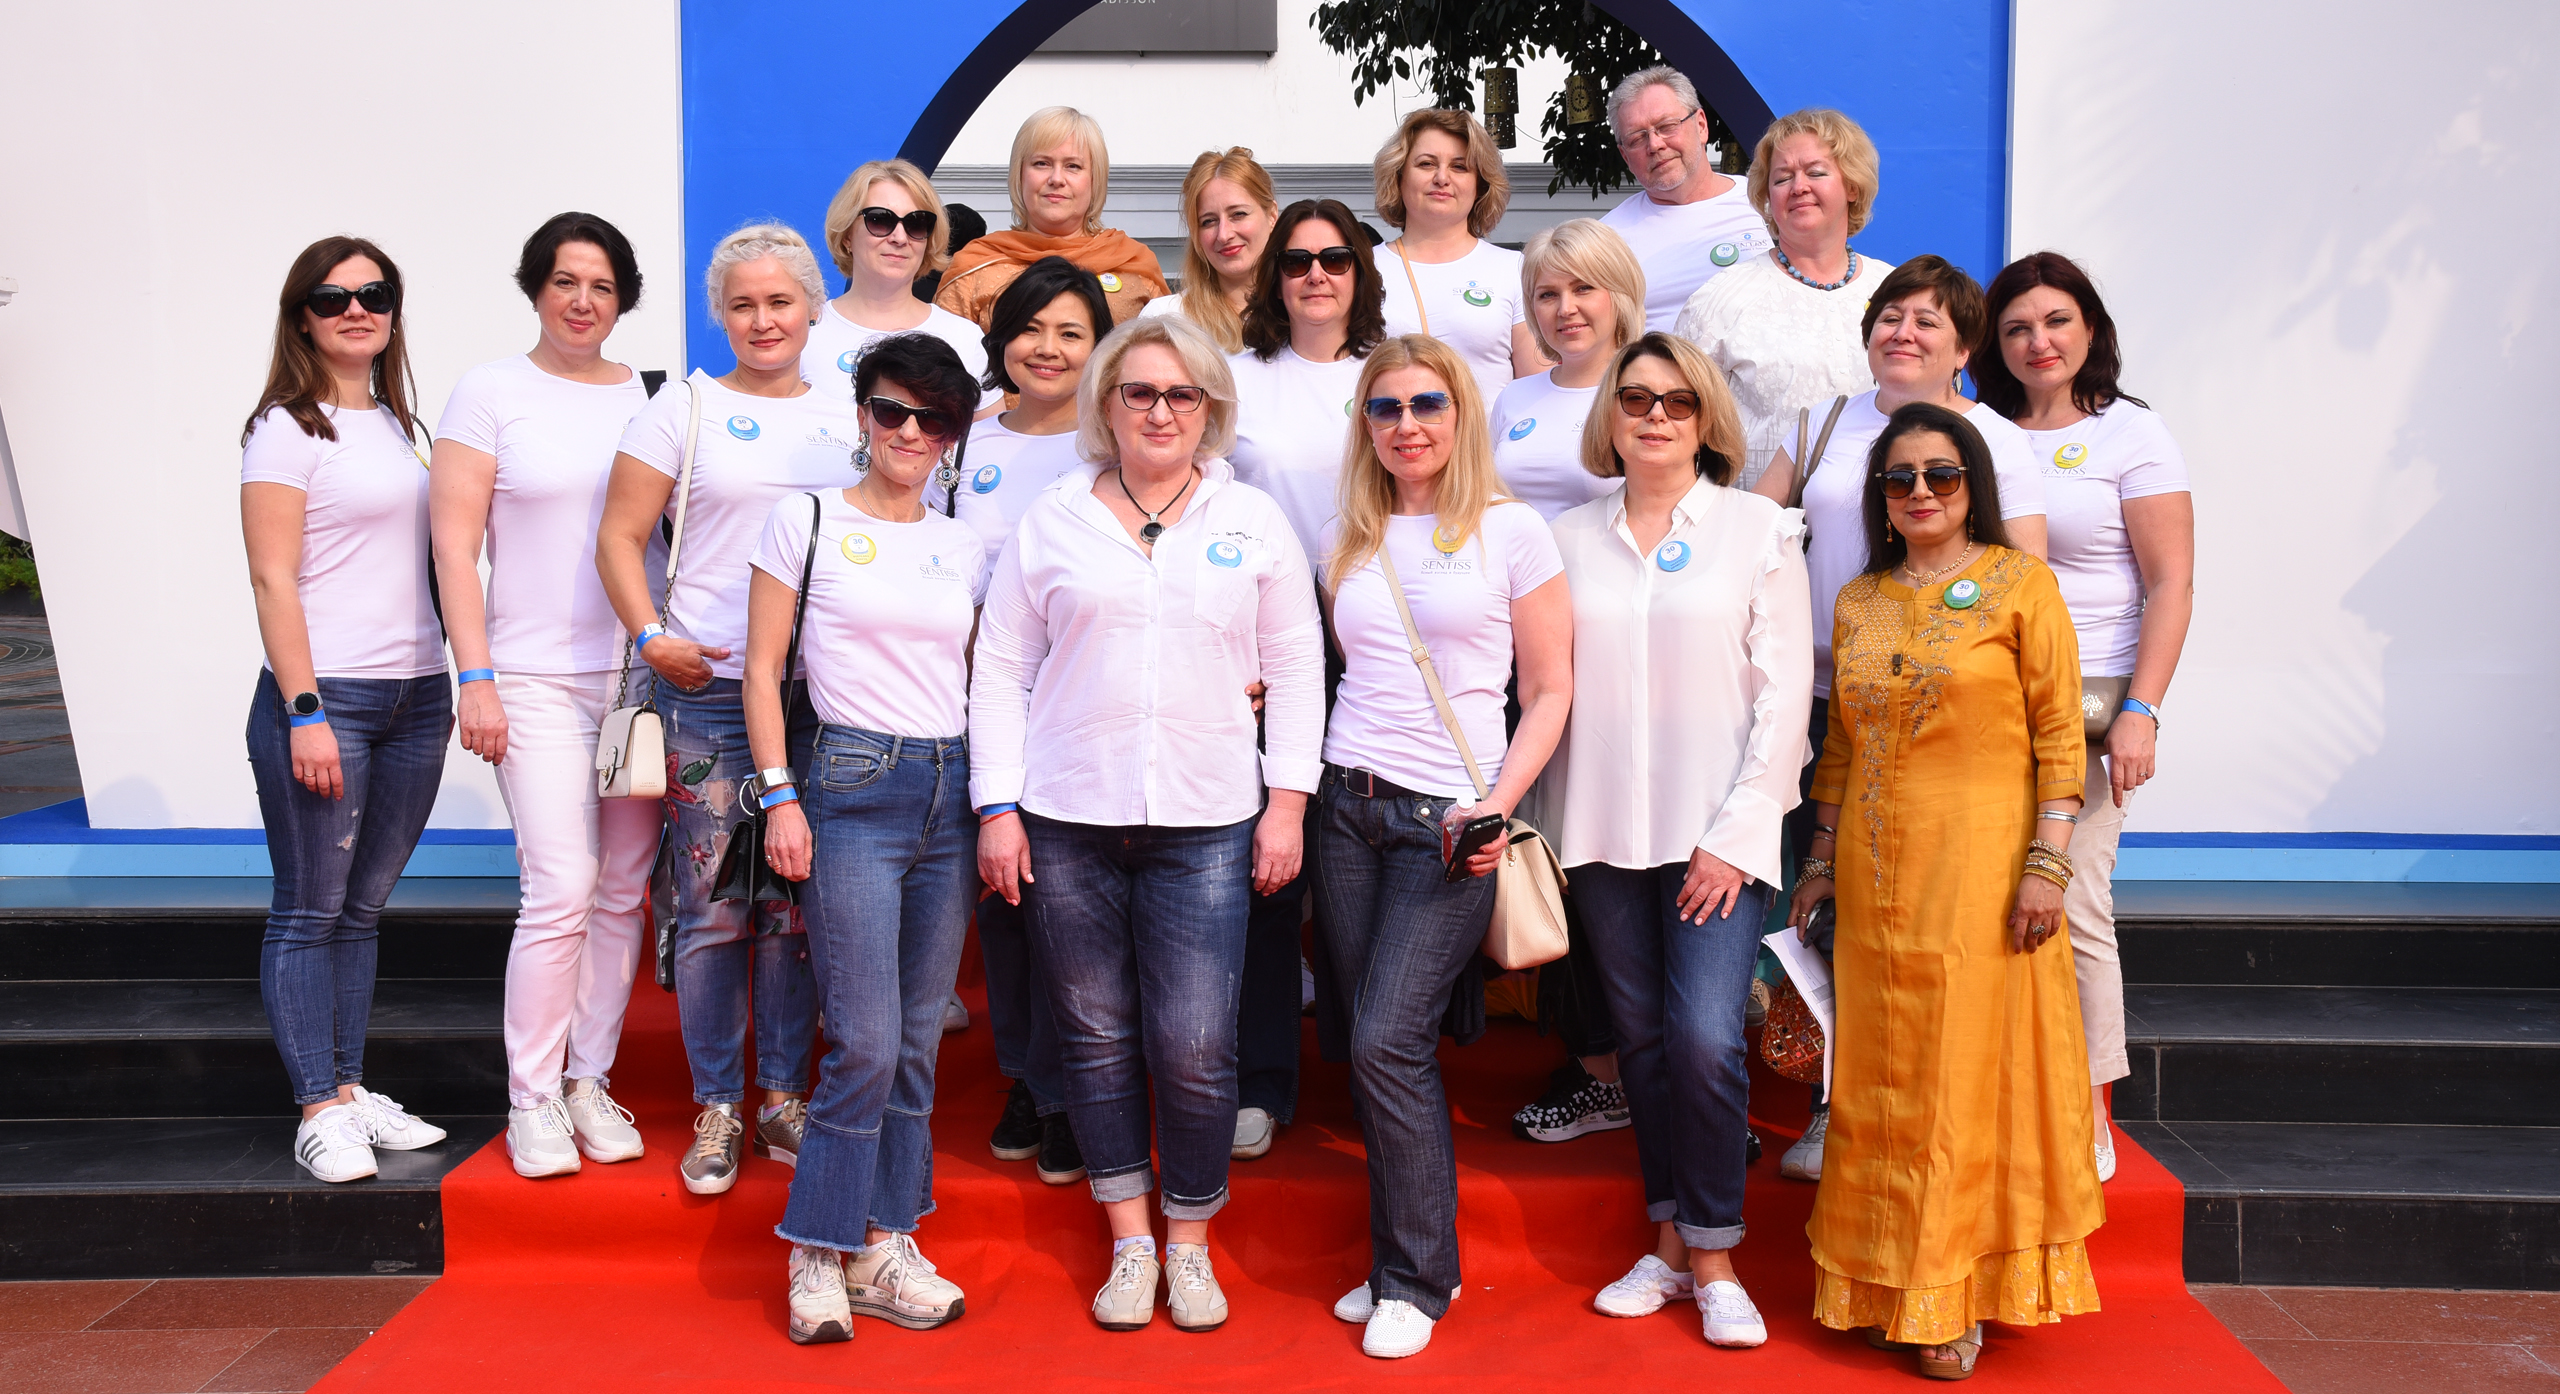 Members of International team during 30th Anniversary Celebrations in India